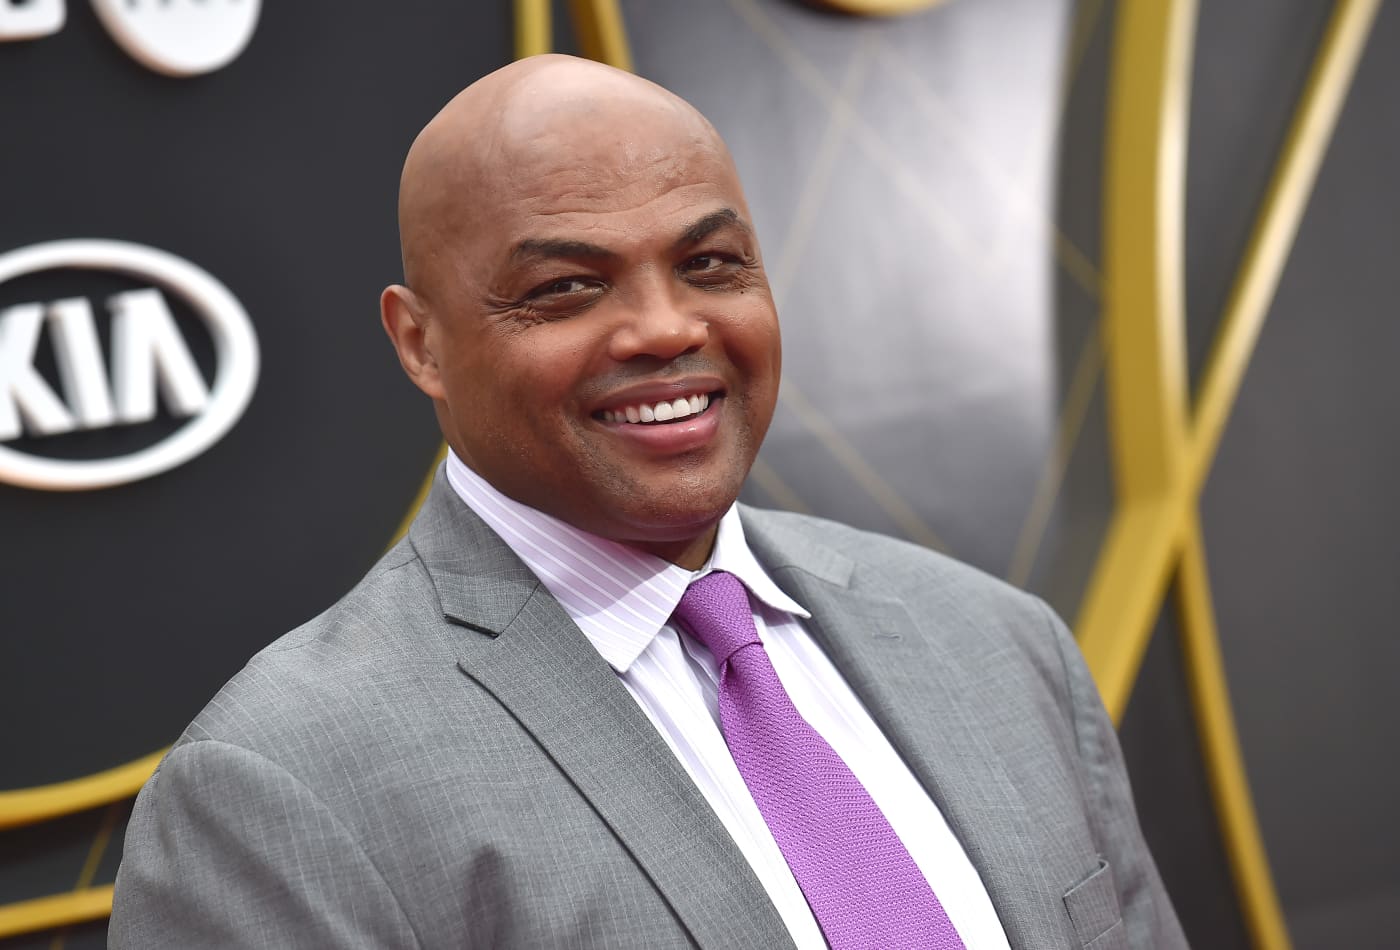 Charles Barkley reveals something potentially newsworthy about the NBA season 